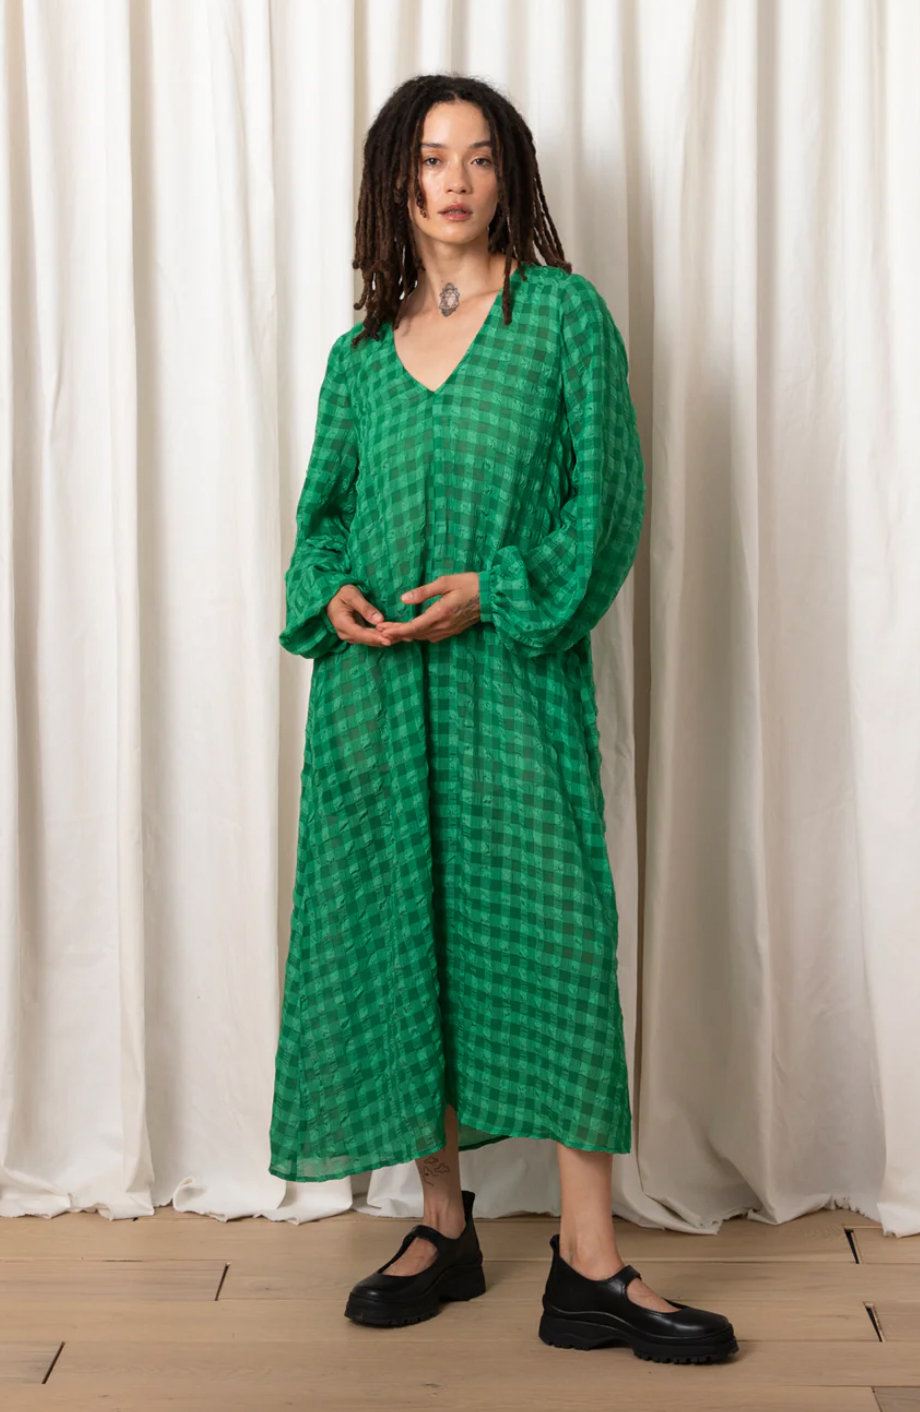 Product Image for Long Sleeve V-Neck Dress, Kelly Green Check